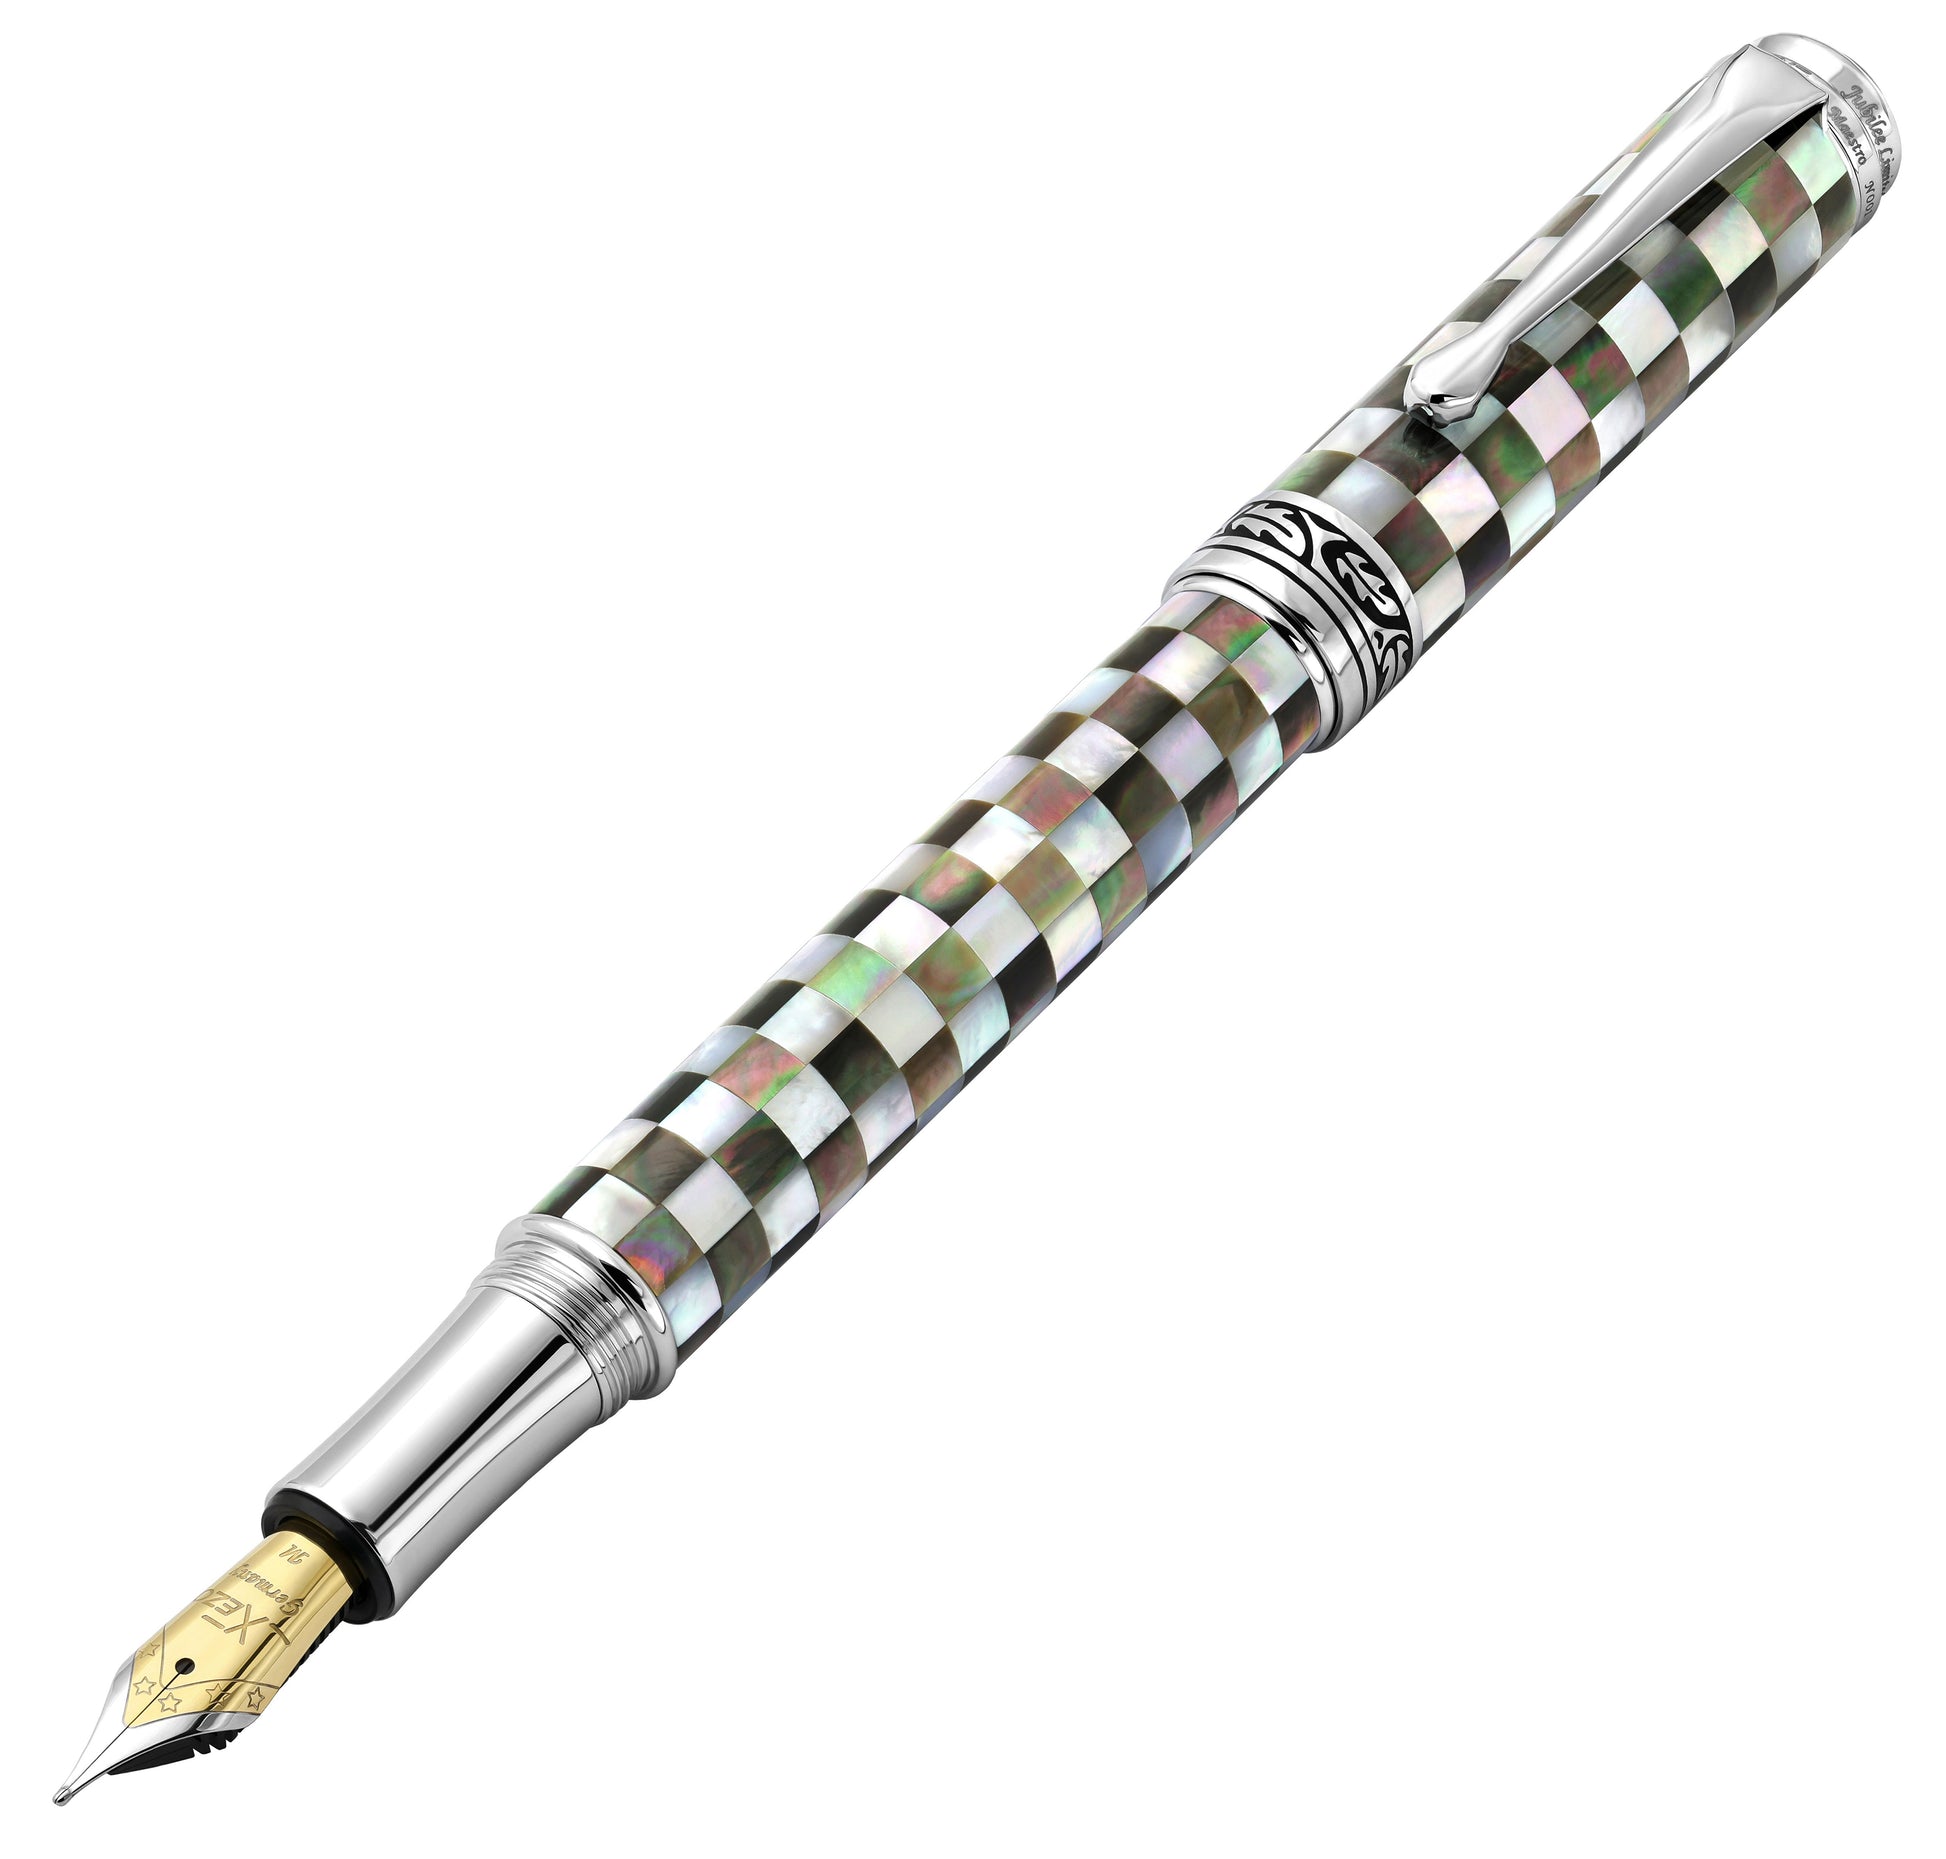 Maestro Jubilee Classic Of The Ocean Medium Fountain Pen uncapped at an angle